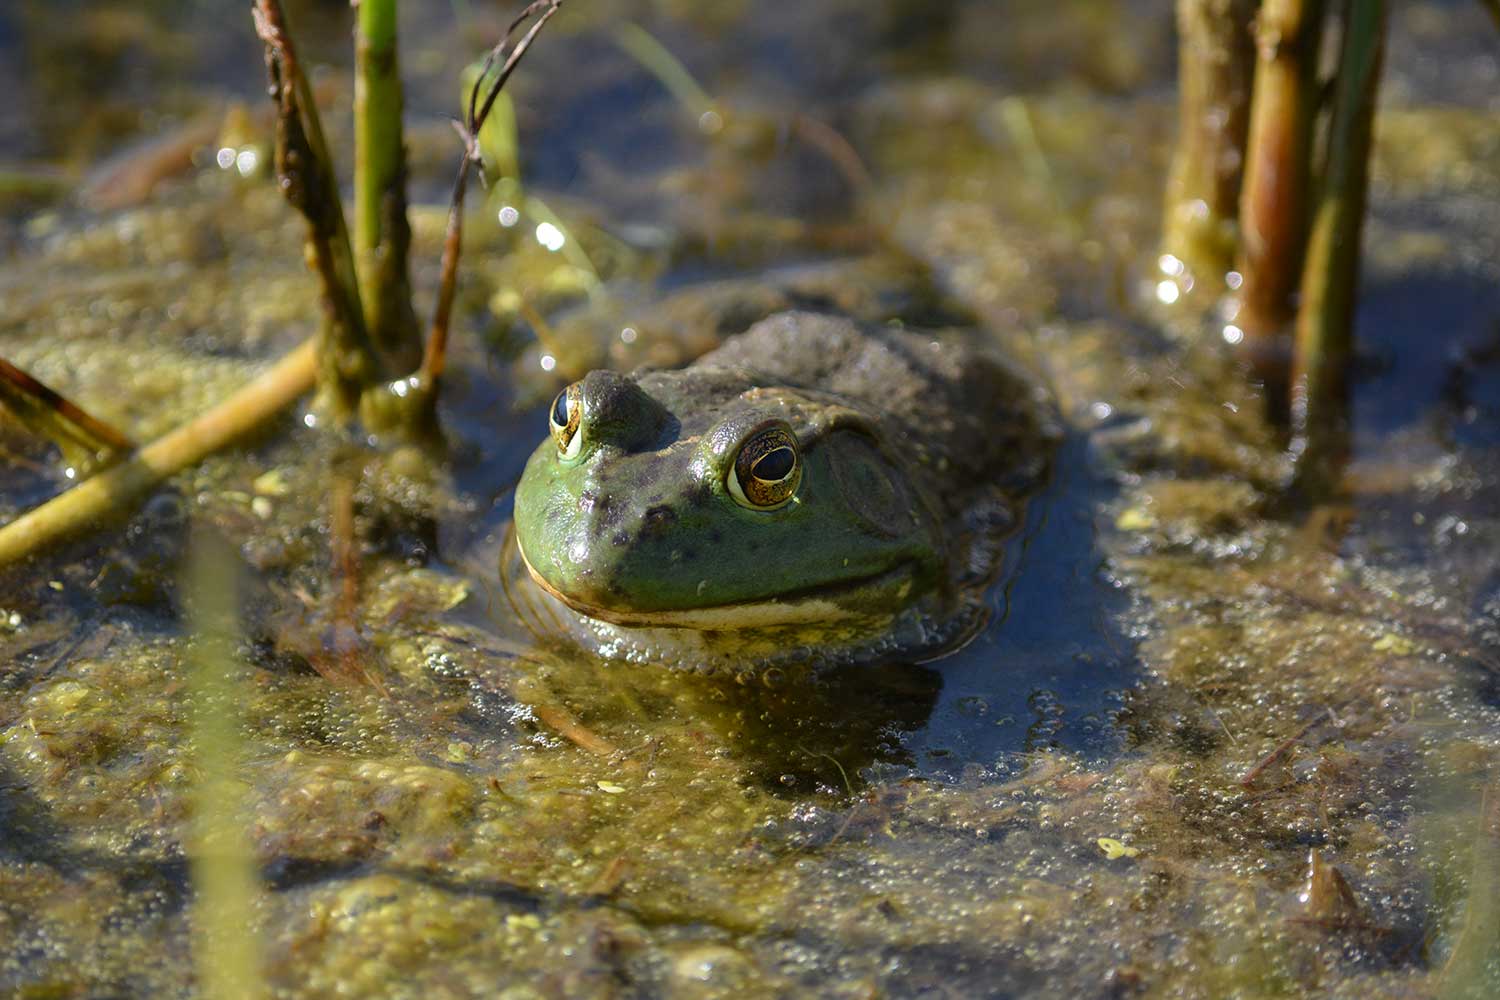 A bullfrog with its head emerging from the shallow water filled with vegetation.